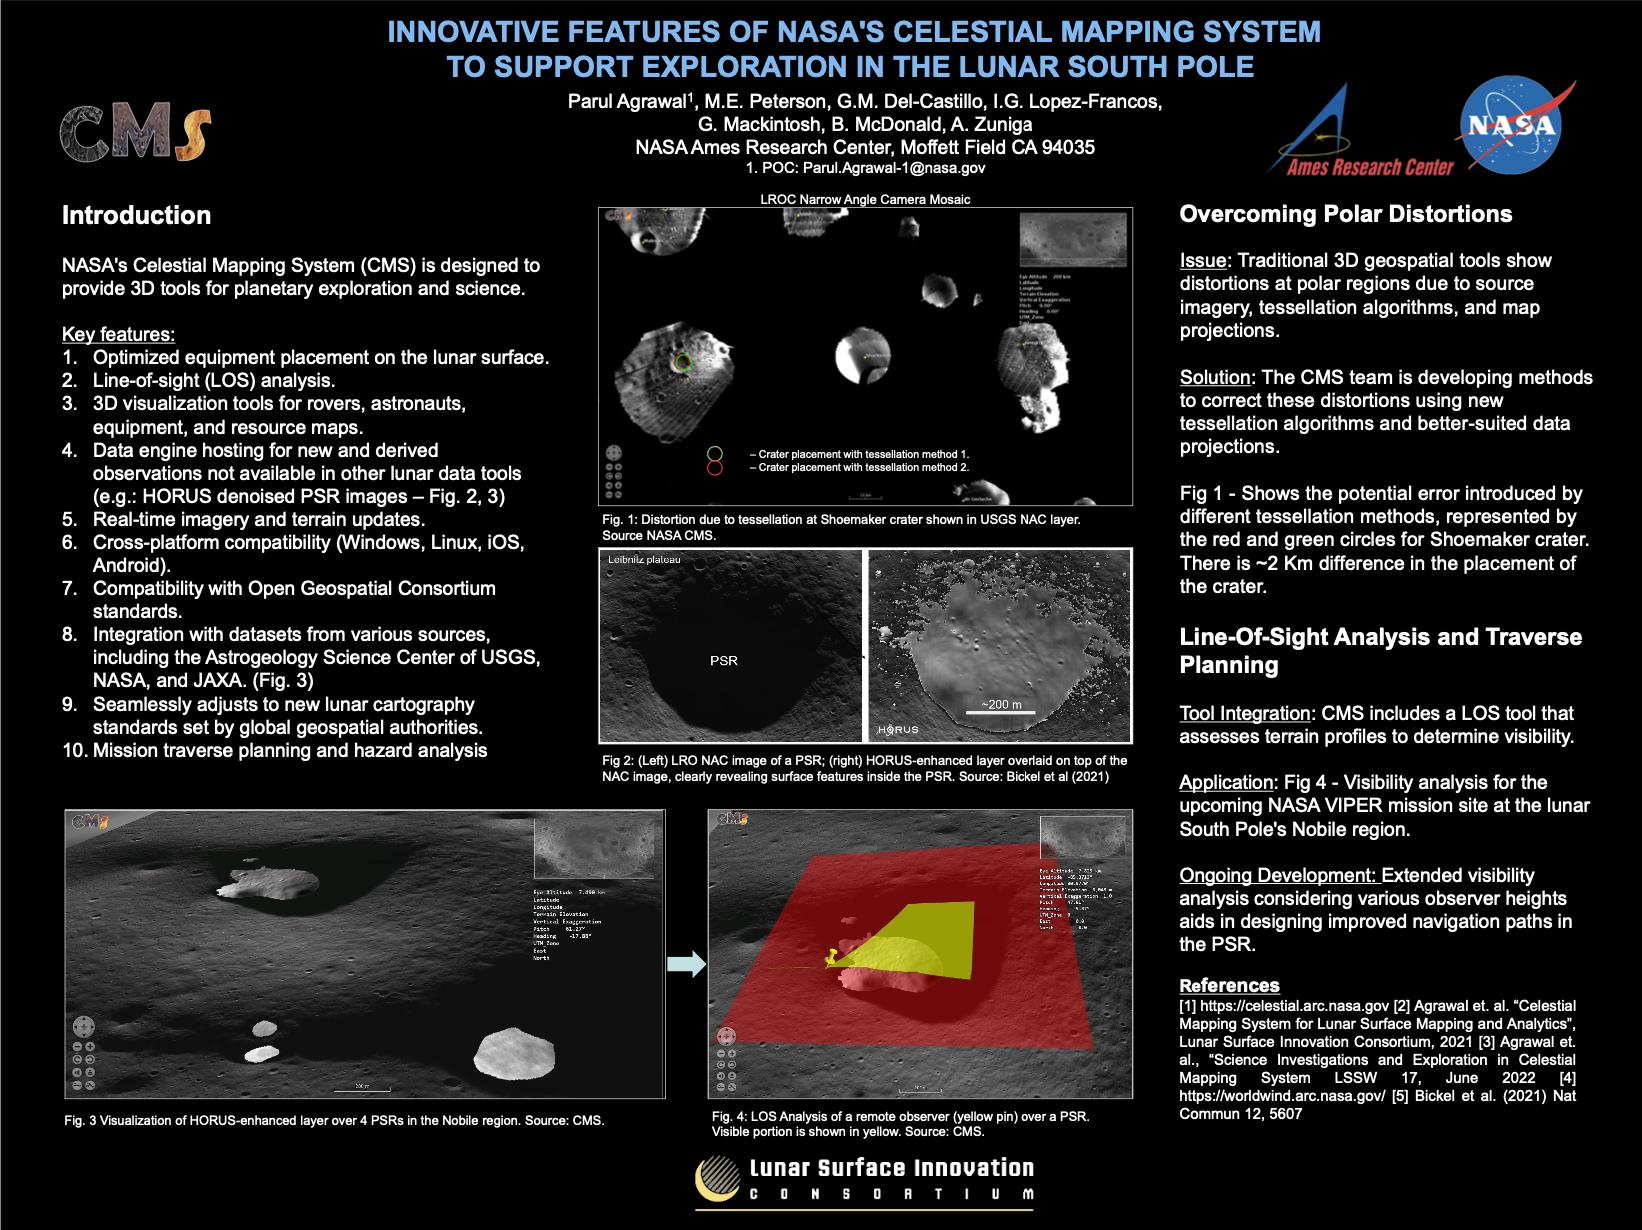 Innovative Features of NASA's Celestial Mapping System to Support Exploration in the Lunar South Pole Poster